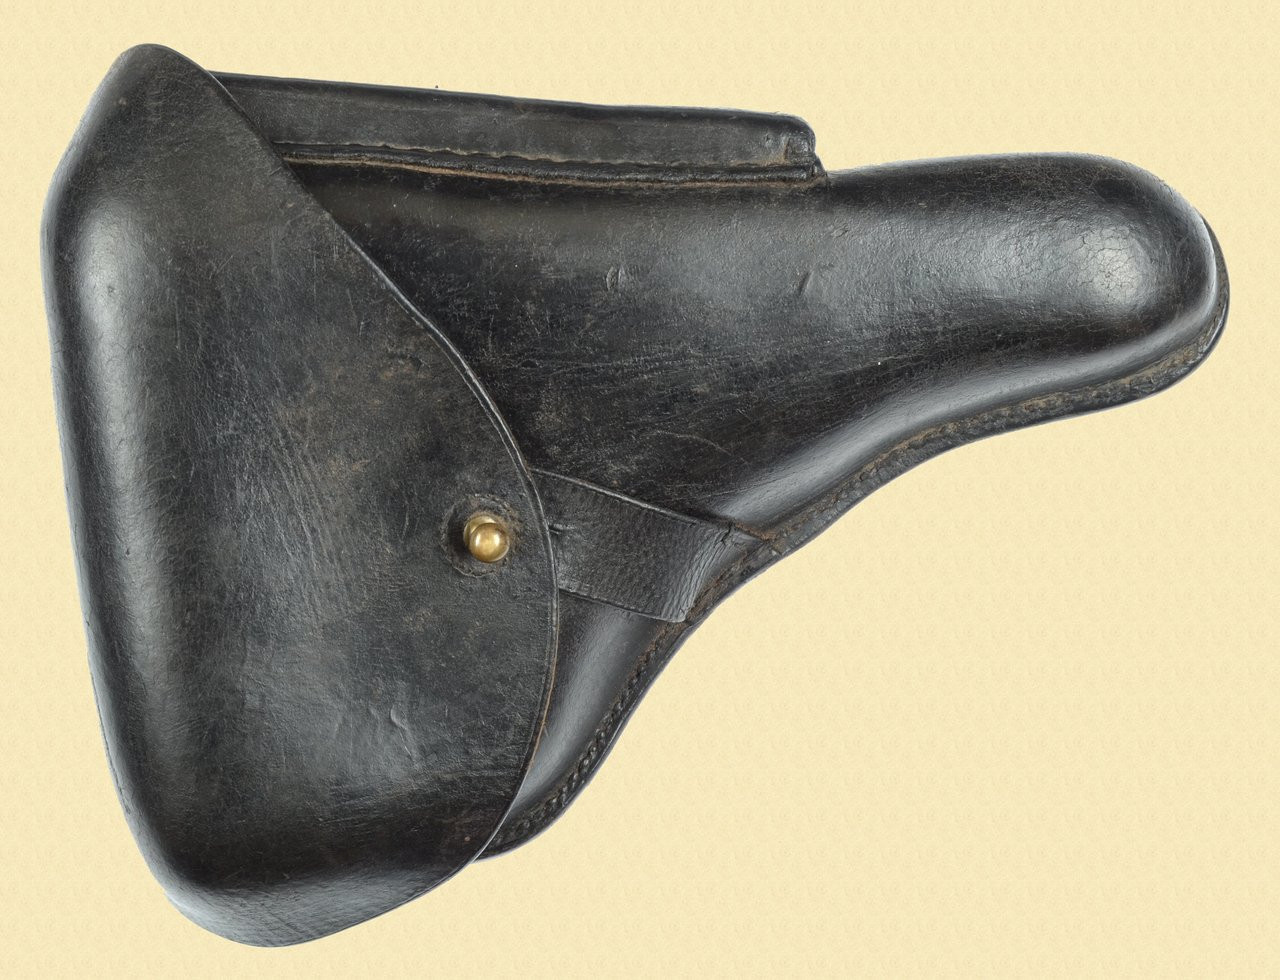 LUGER P.08 HOLSTER - C24089